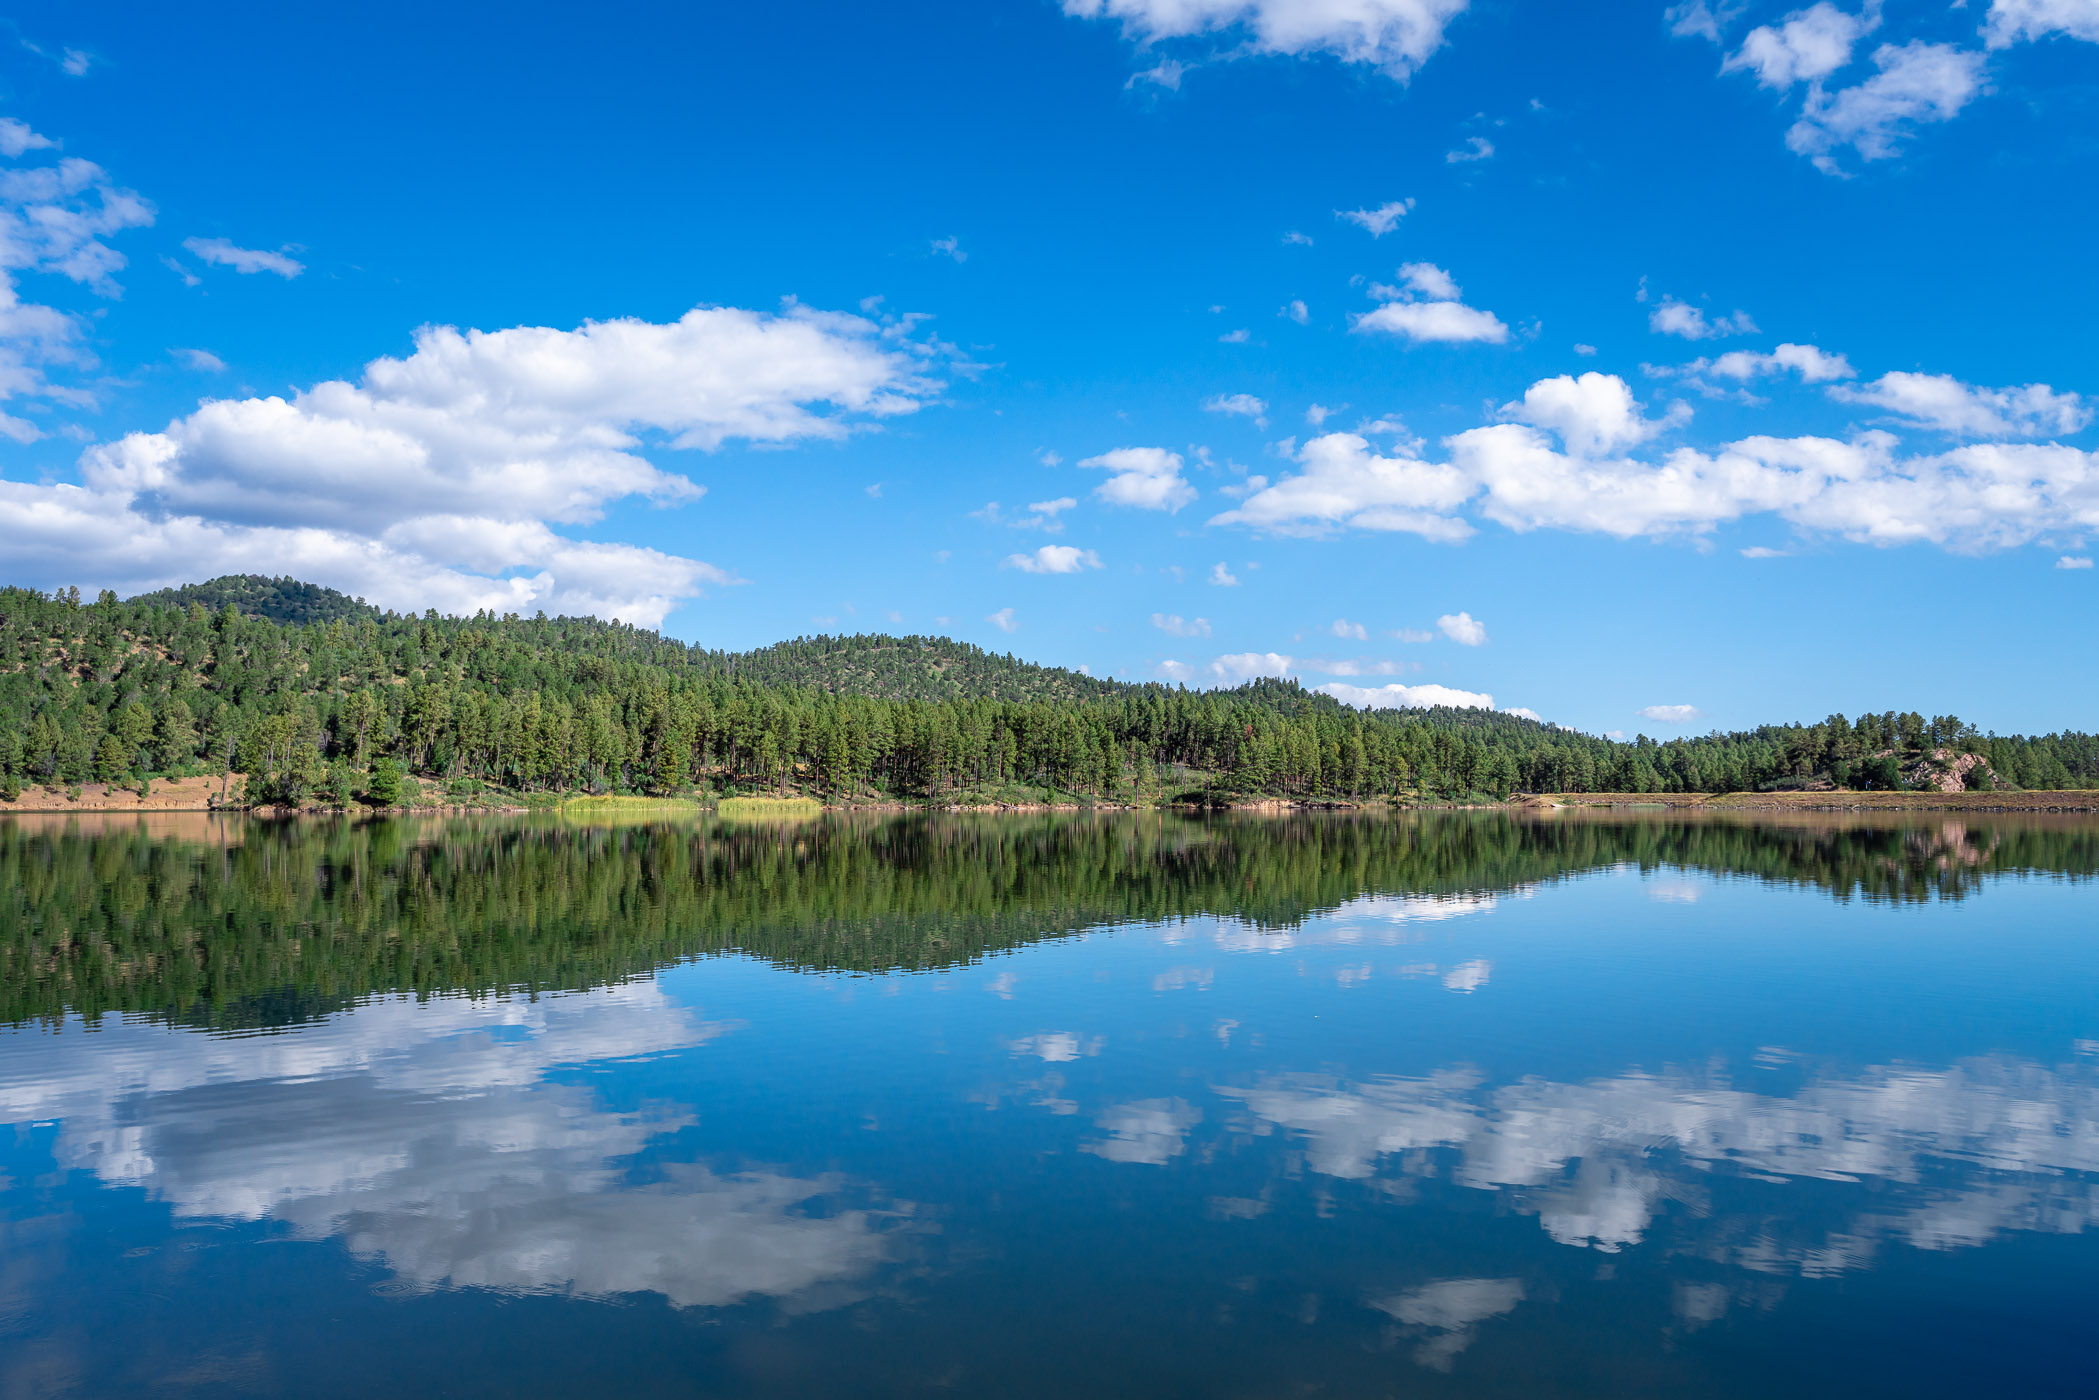 Evergreen trees reflect on the calm waters of Mescalero Lake at the Inn of the Mountain Gods, Ruidoso, New Mexico.